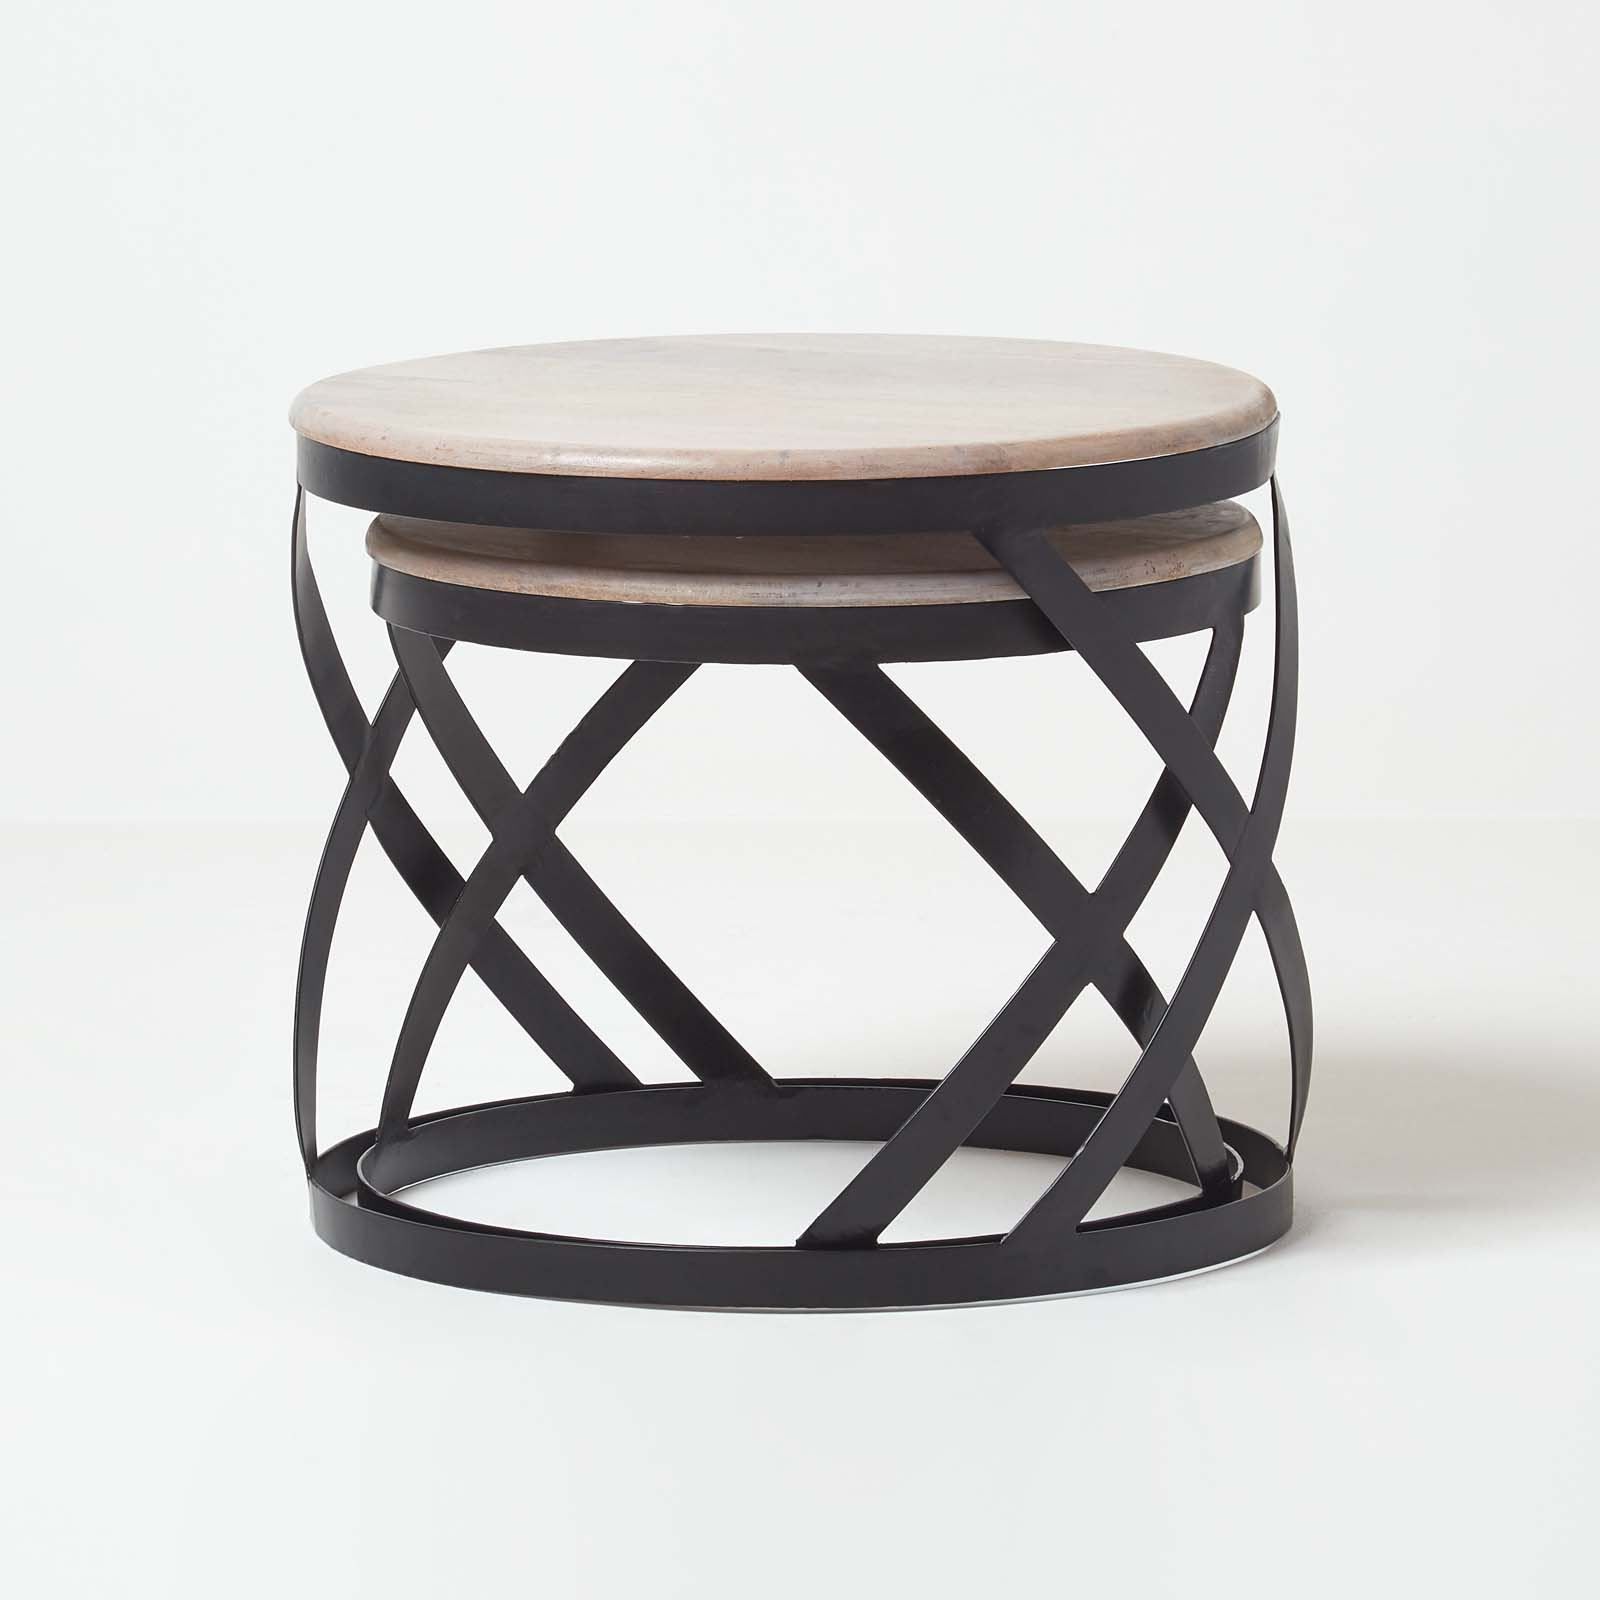 Solid Wood Round Barrel Nesting Tables With Steel Legs Inside Metal Legs And Oak Top Round Console Tables (View 14 of 20)